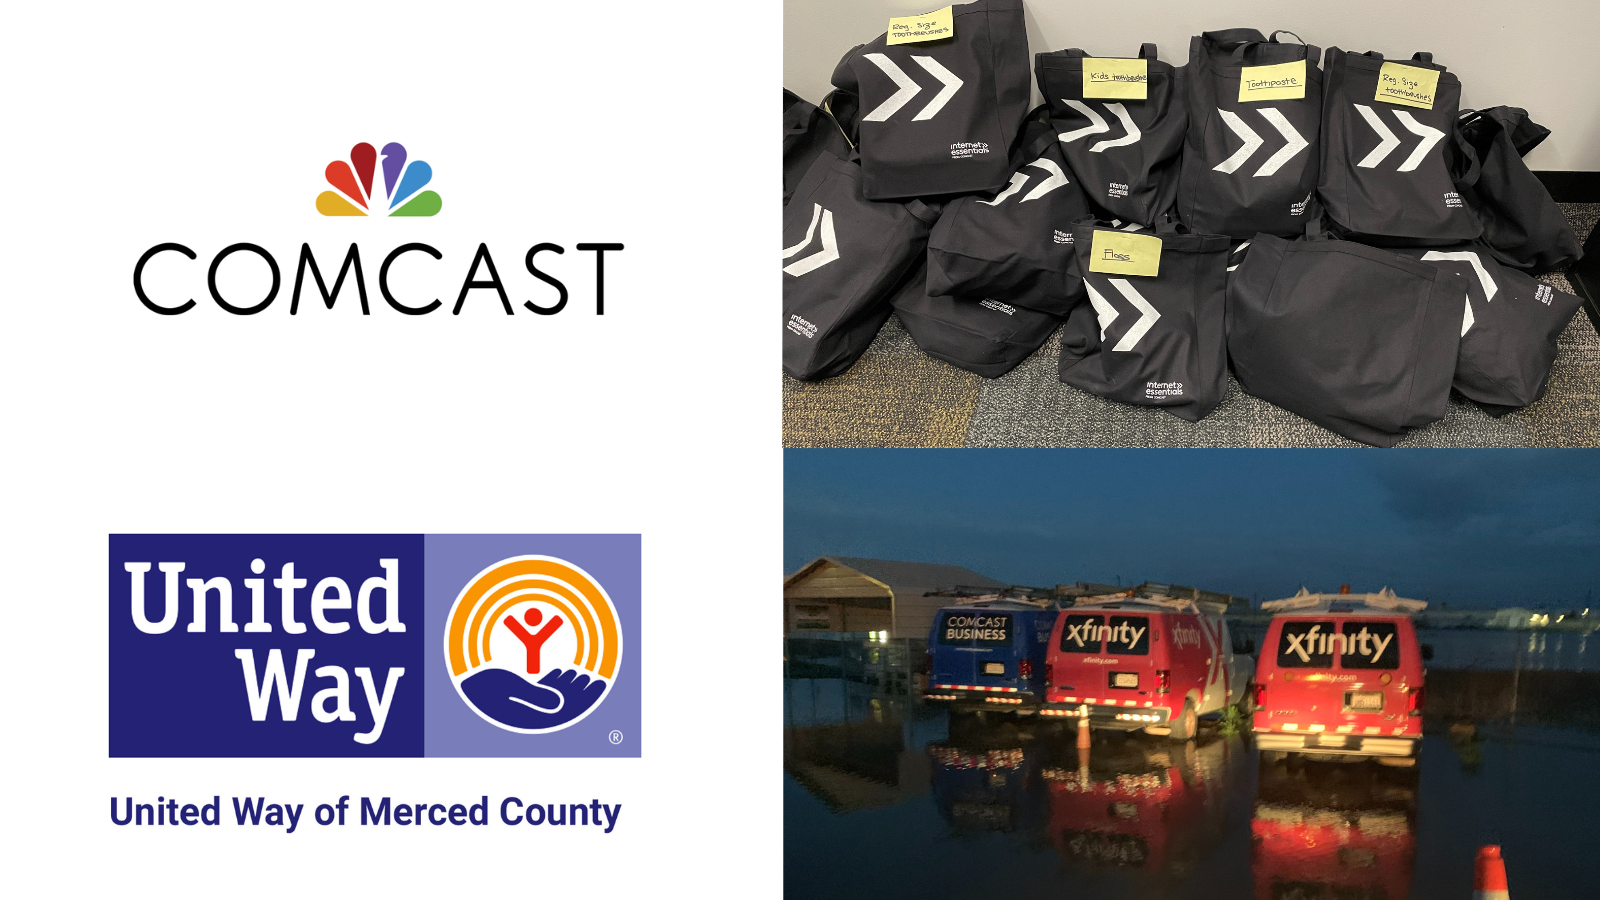 Comcast Joins United Way of Merced County’s Efforts to Support Merced During Time of Crisis